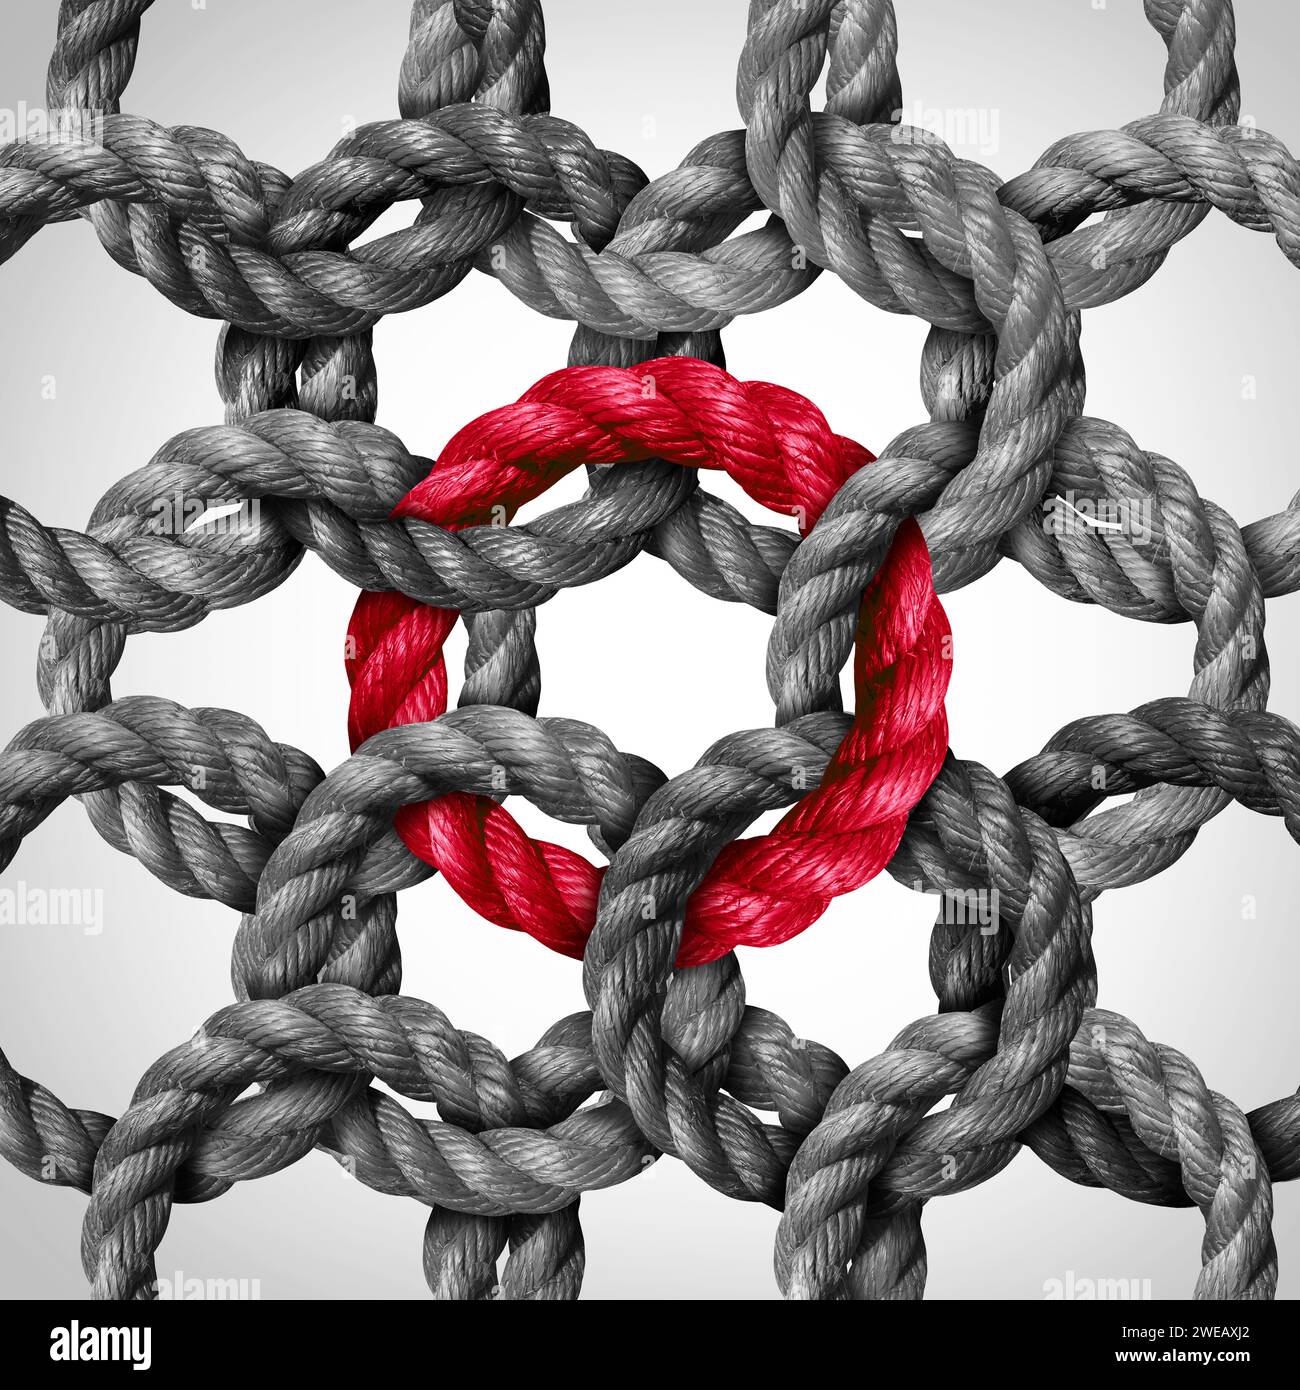 Central link concept and networking or key network connection as a business metaphor with a group of circle ropes connected to one red rope loop as a Stock Photo